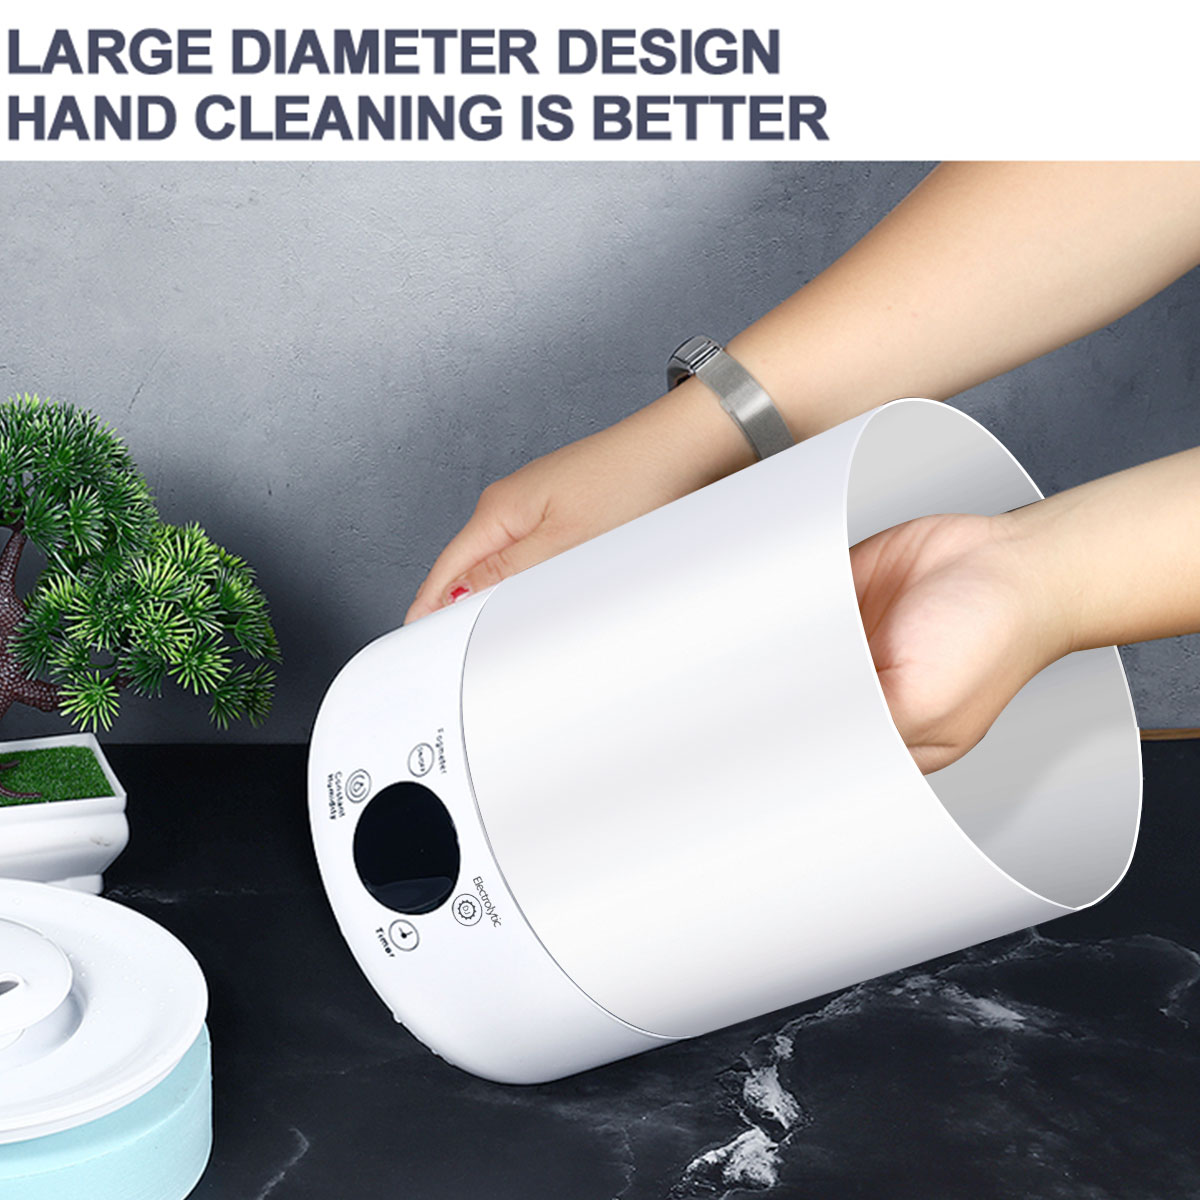 28L-LCD-Light-UP-Air-Oil-Aroma-Diffuser-Humidifier-Electric-Home-Purifier-1940222-7